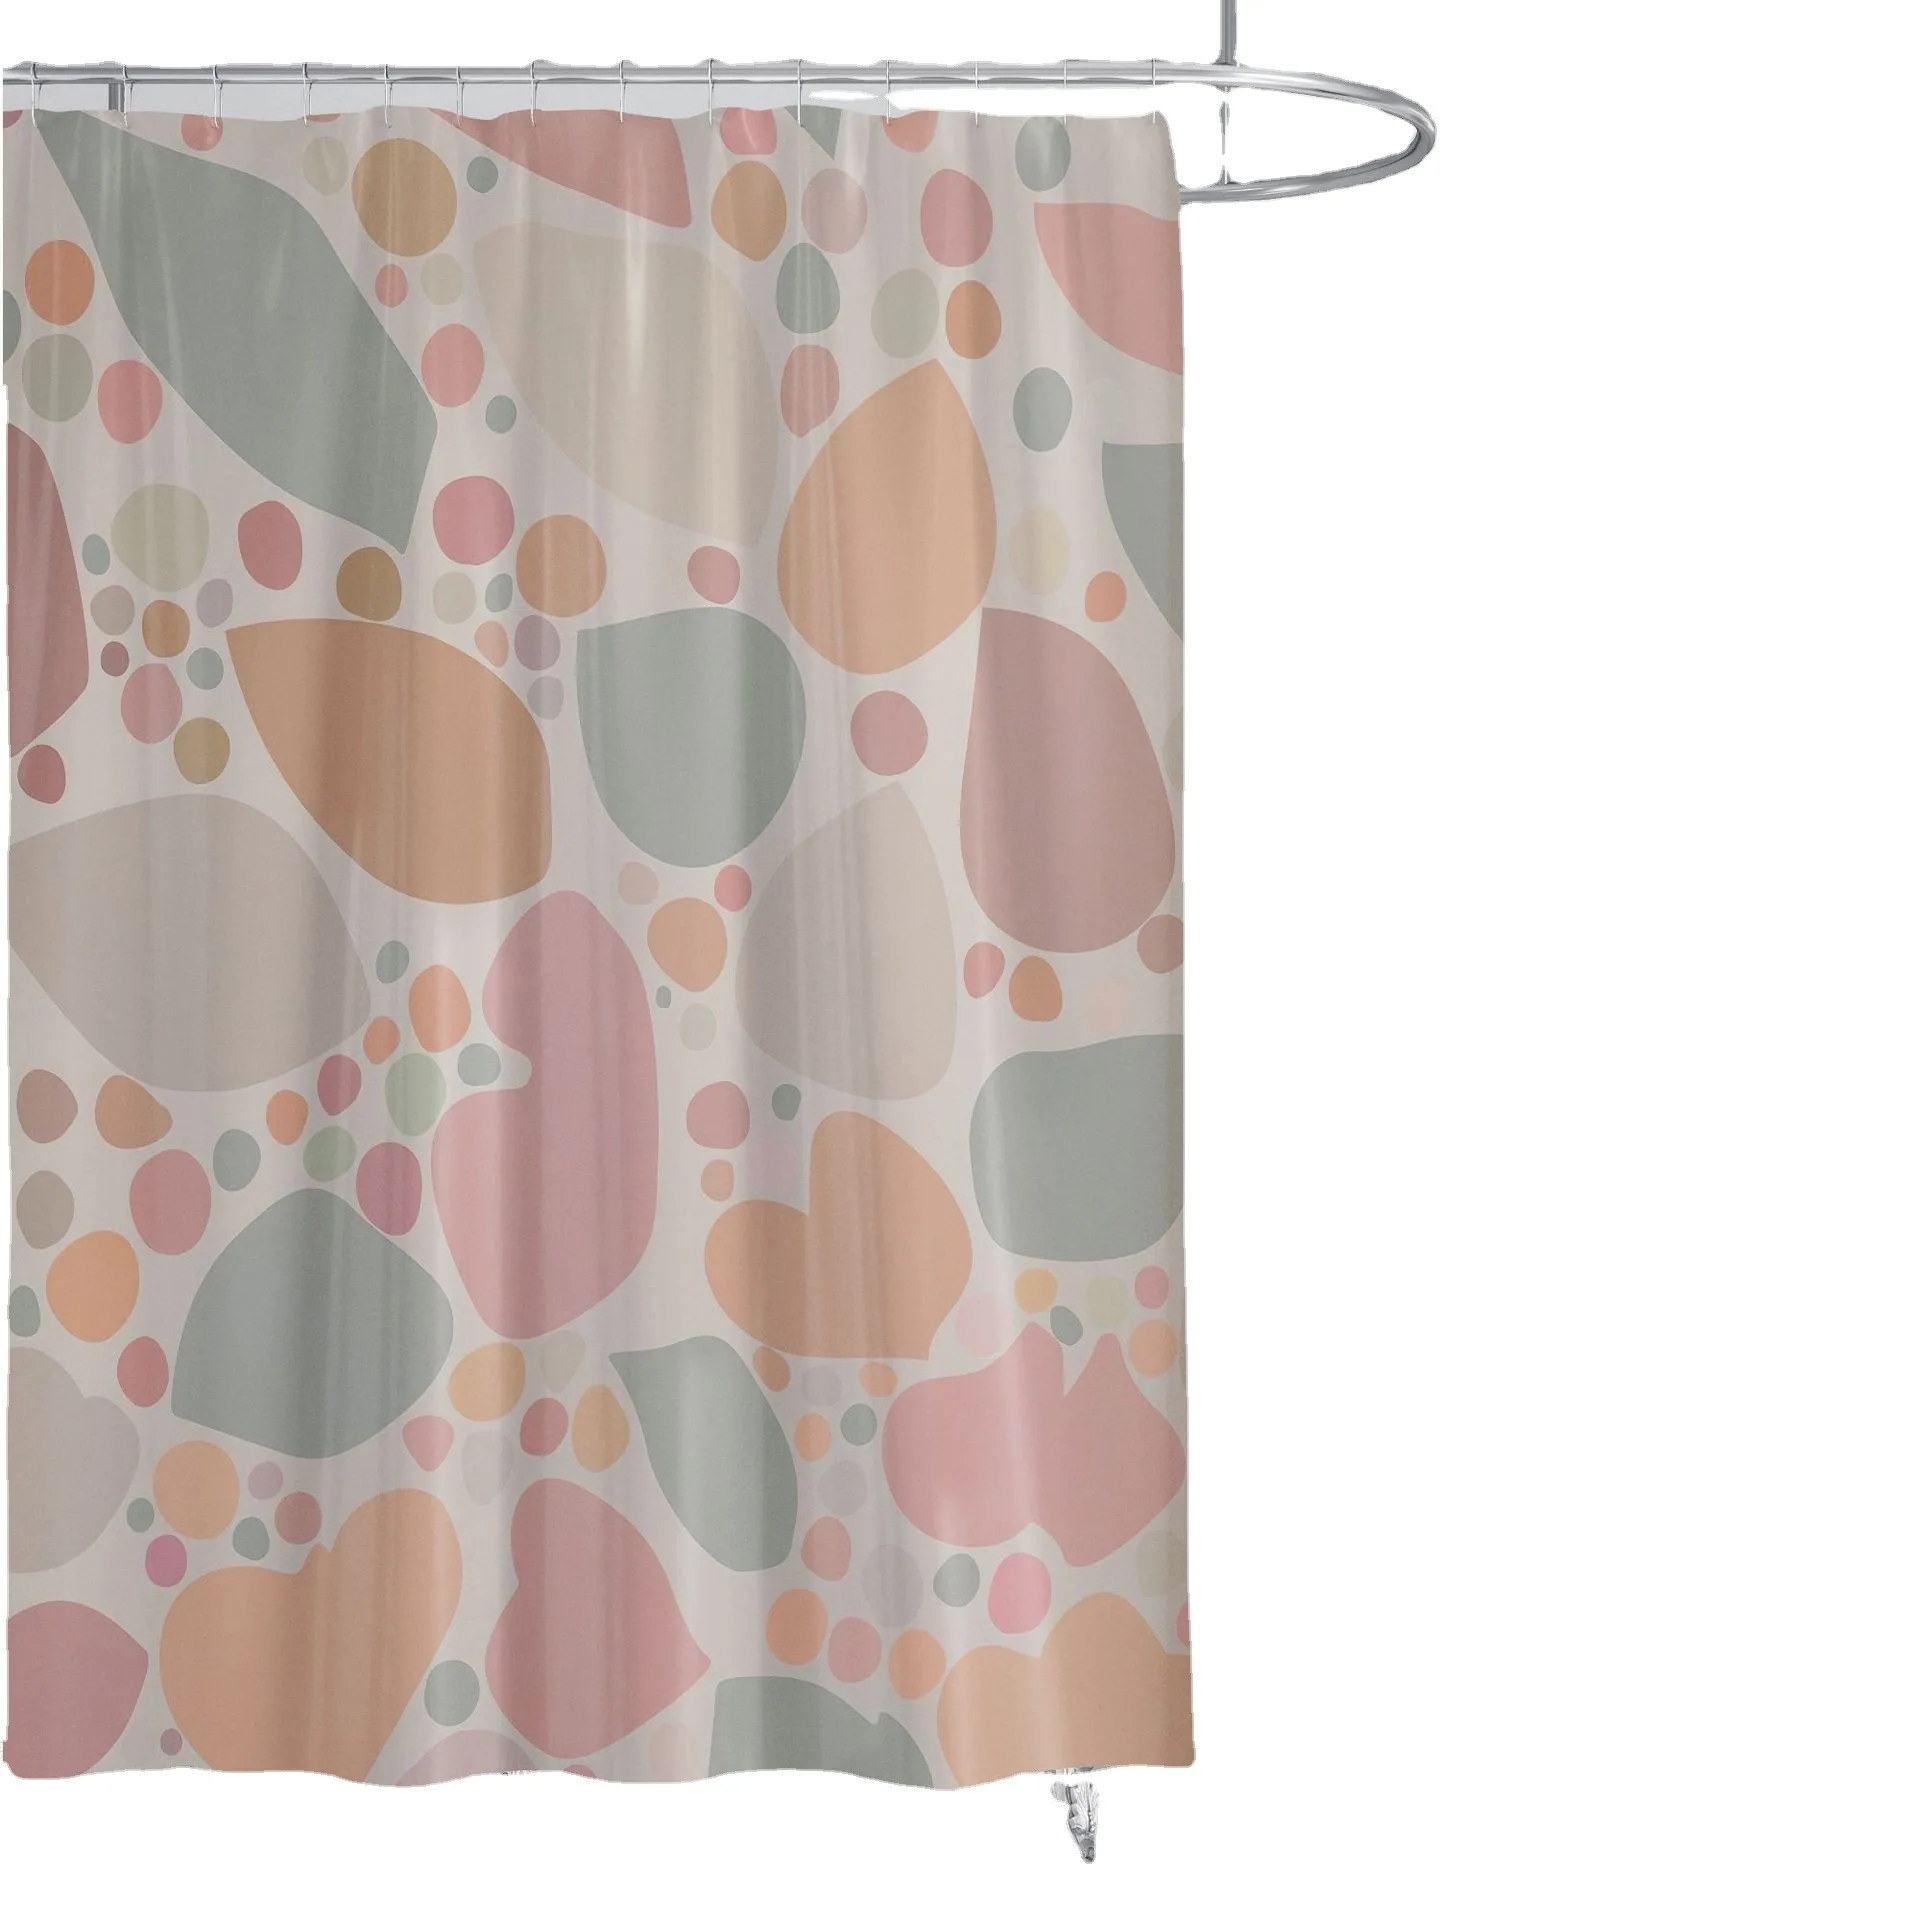 

wholesale hot sale manufacturer fresh flowers bathroom waterproof shower curtain hand-painted printing pvc shower curtain, Picture color